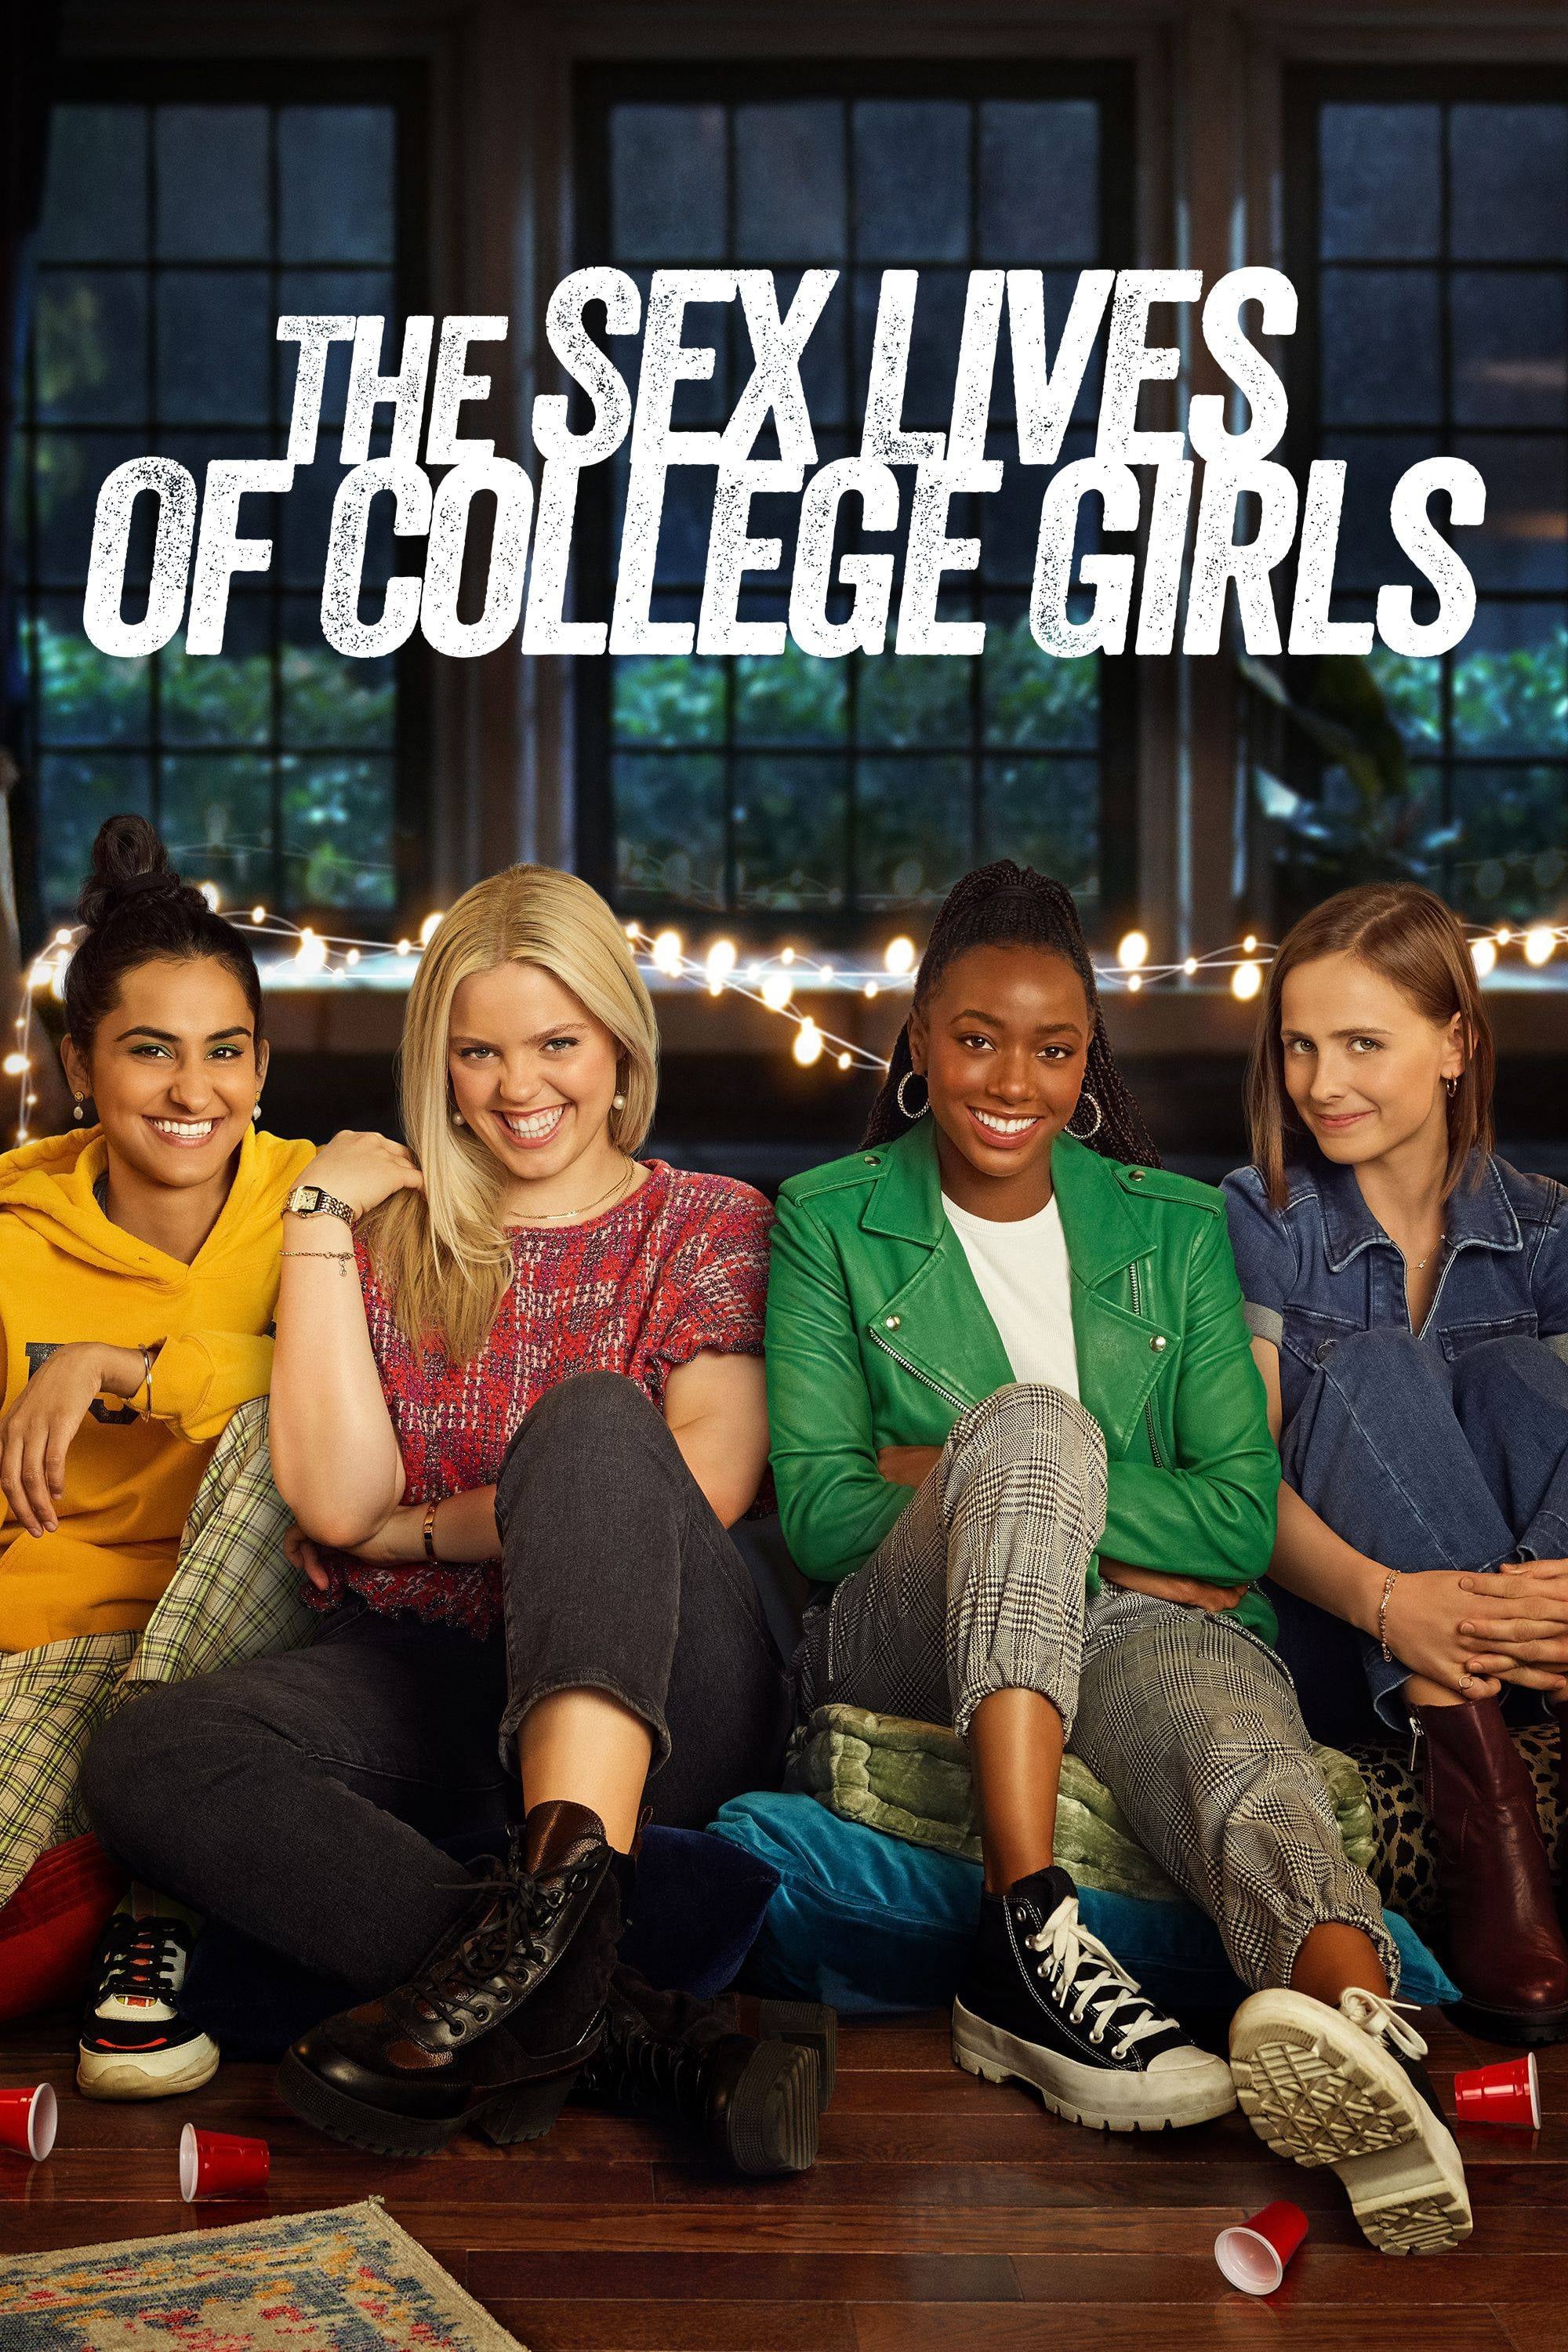 The Sex Lives of College Girls 2022 S02 English Complete Web Series 480p HDRip 1.5GB Download